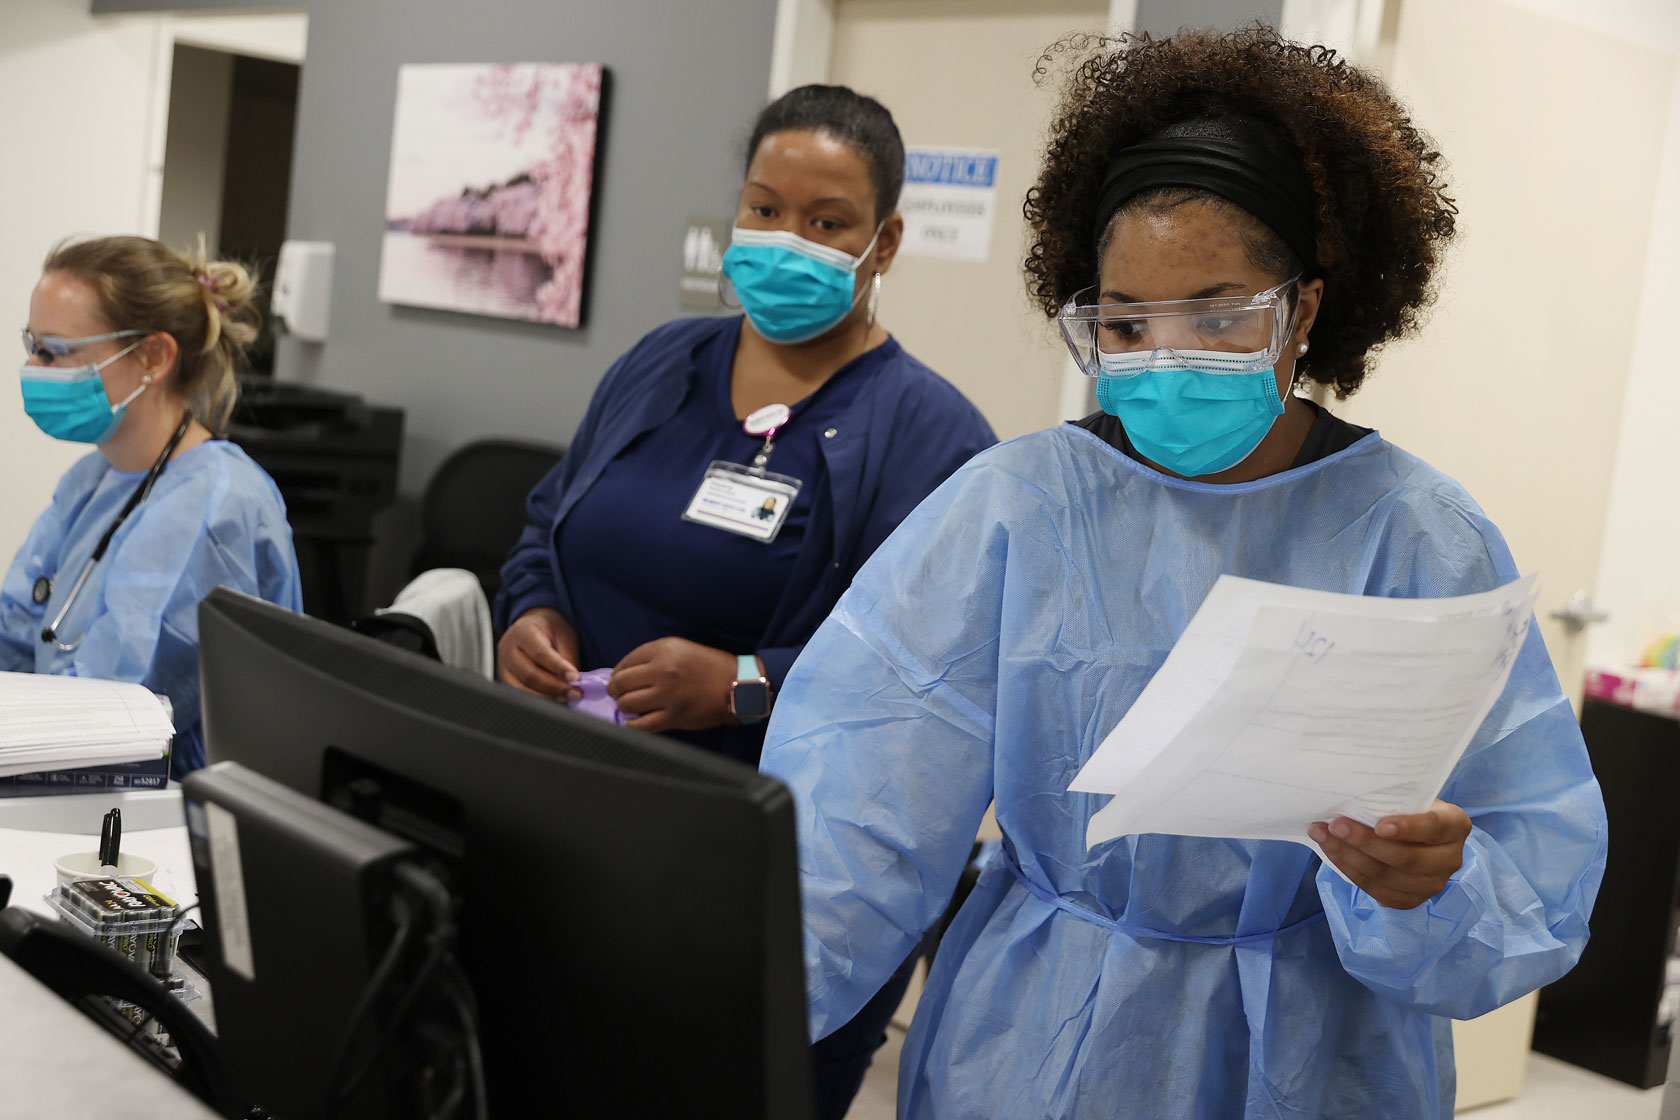 Health care workers at an urgent care center in Woodbridge, Virginia, handle careful patient records in front of a computer.